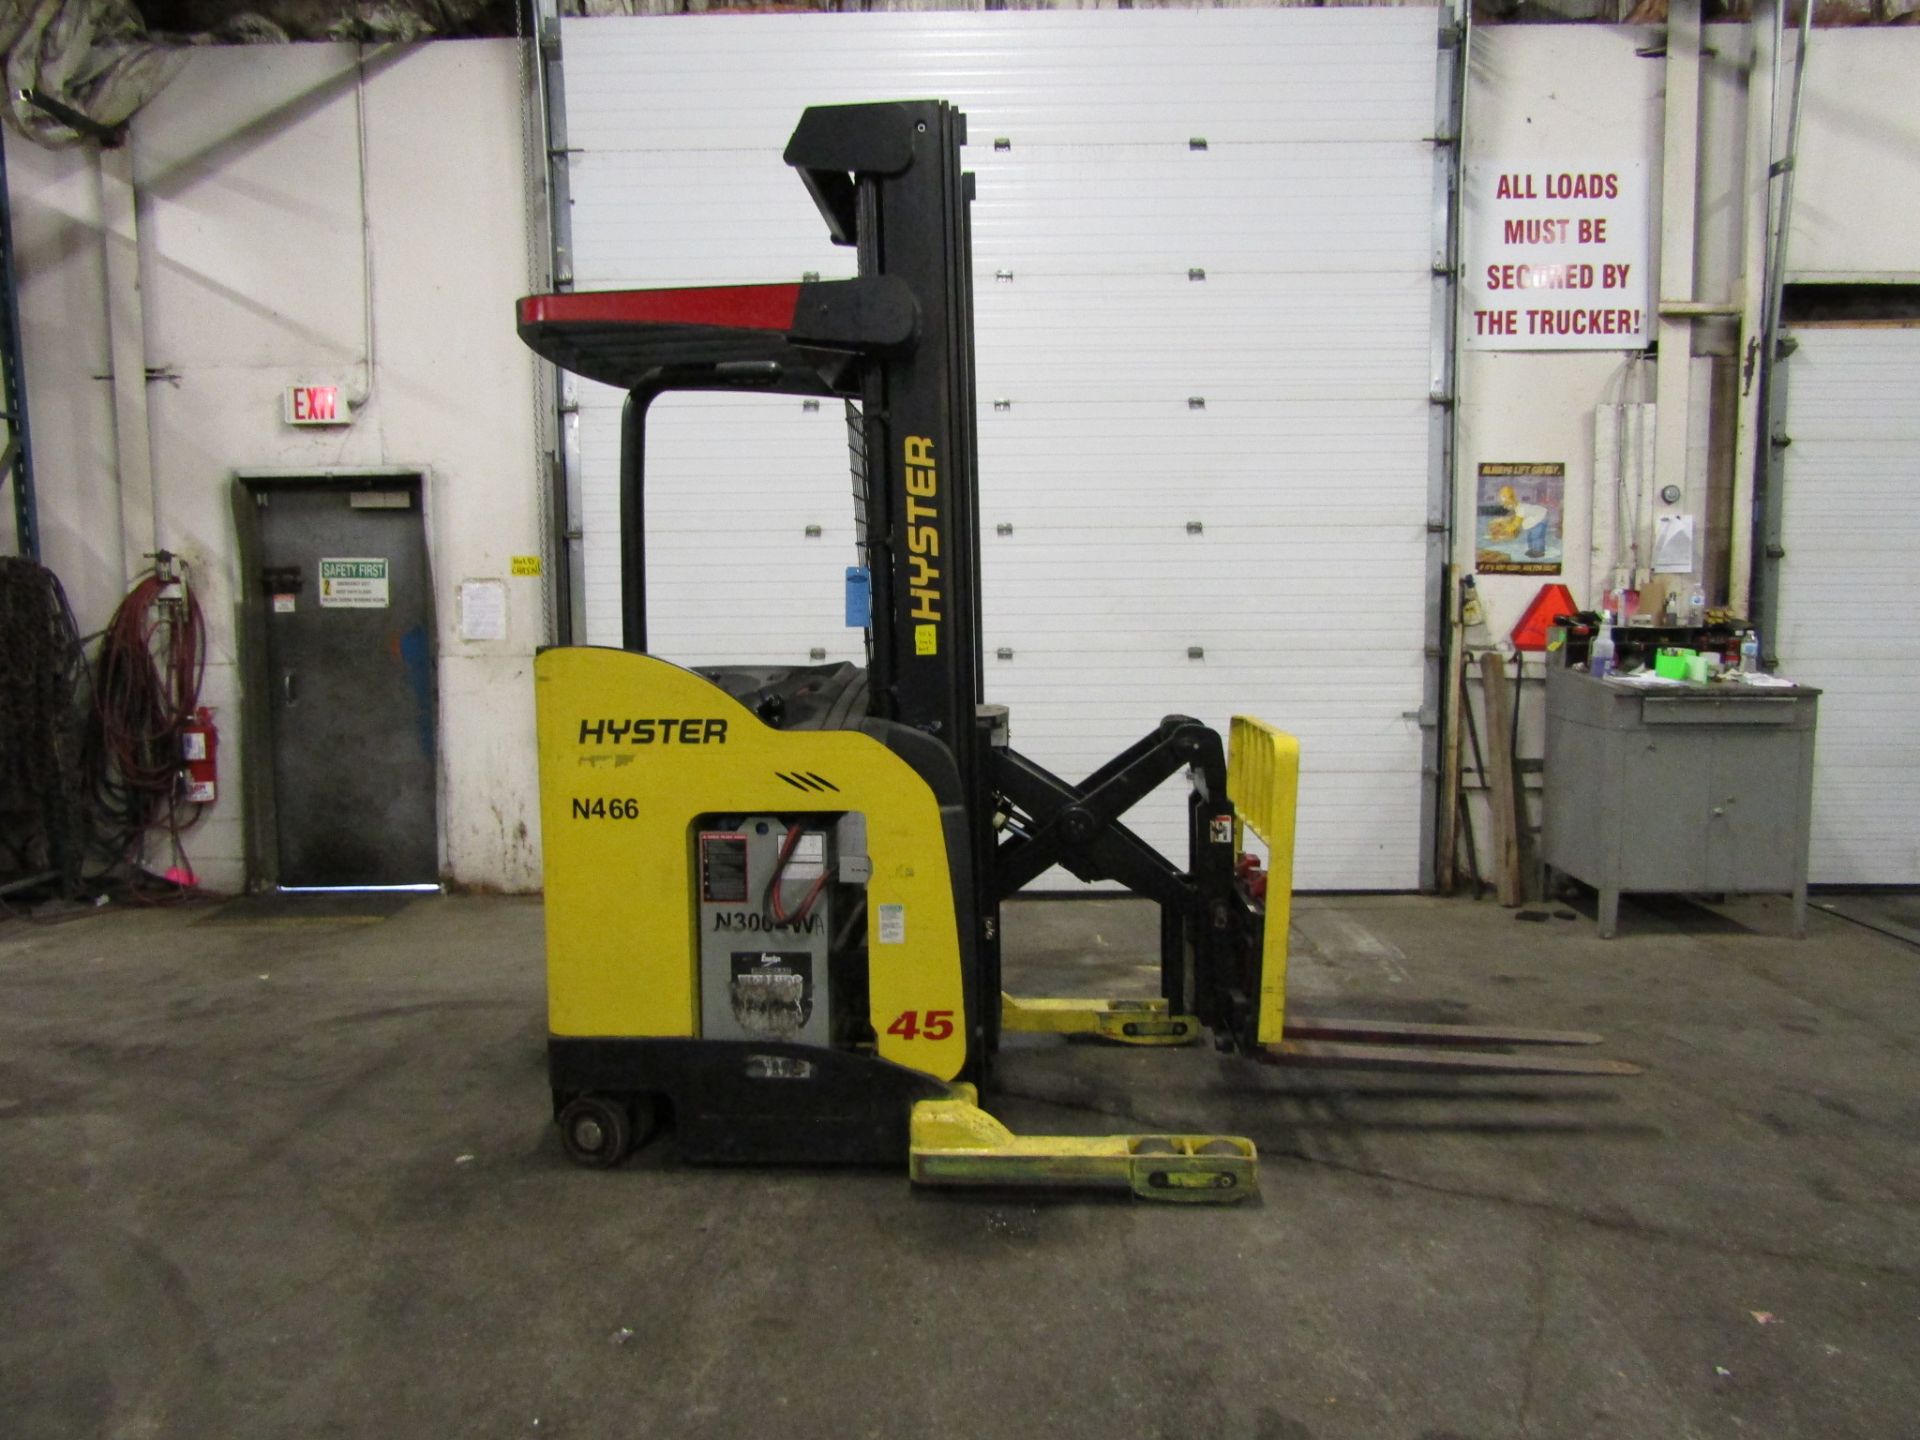 2007 Hyster Reach Truck Pallet Lifter 3000lbs capacity unit ELECTRIC with sideshift and 3-stage